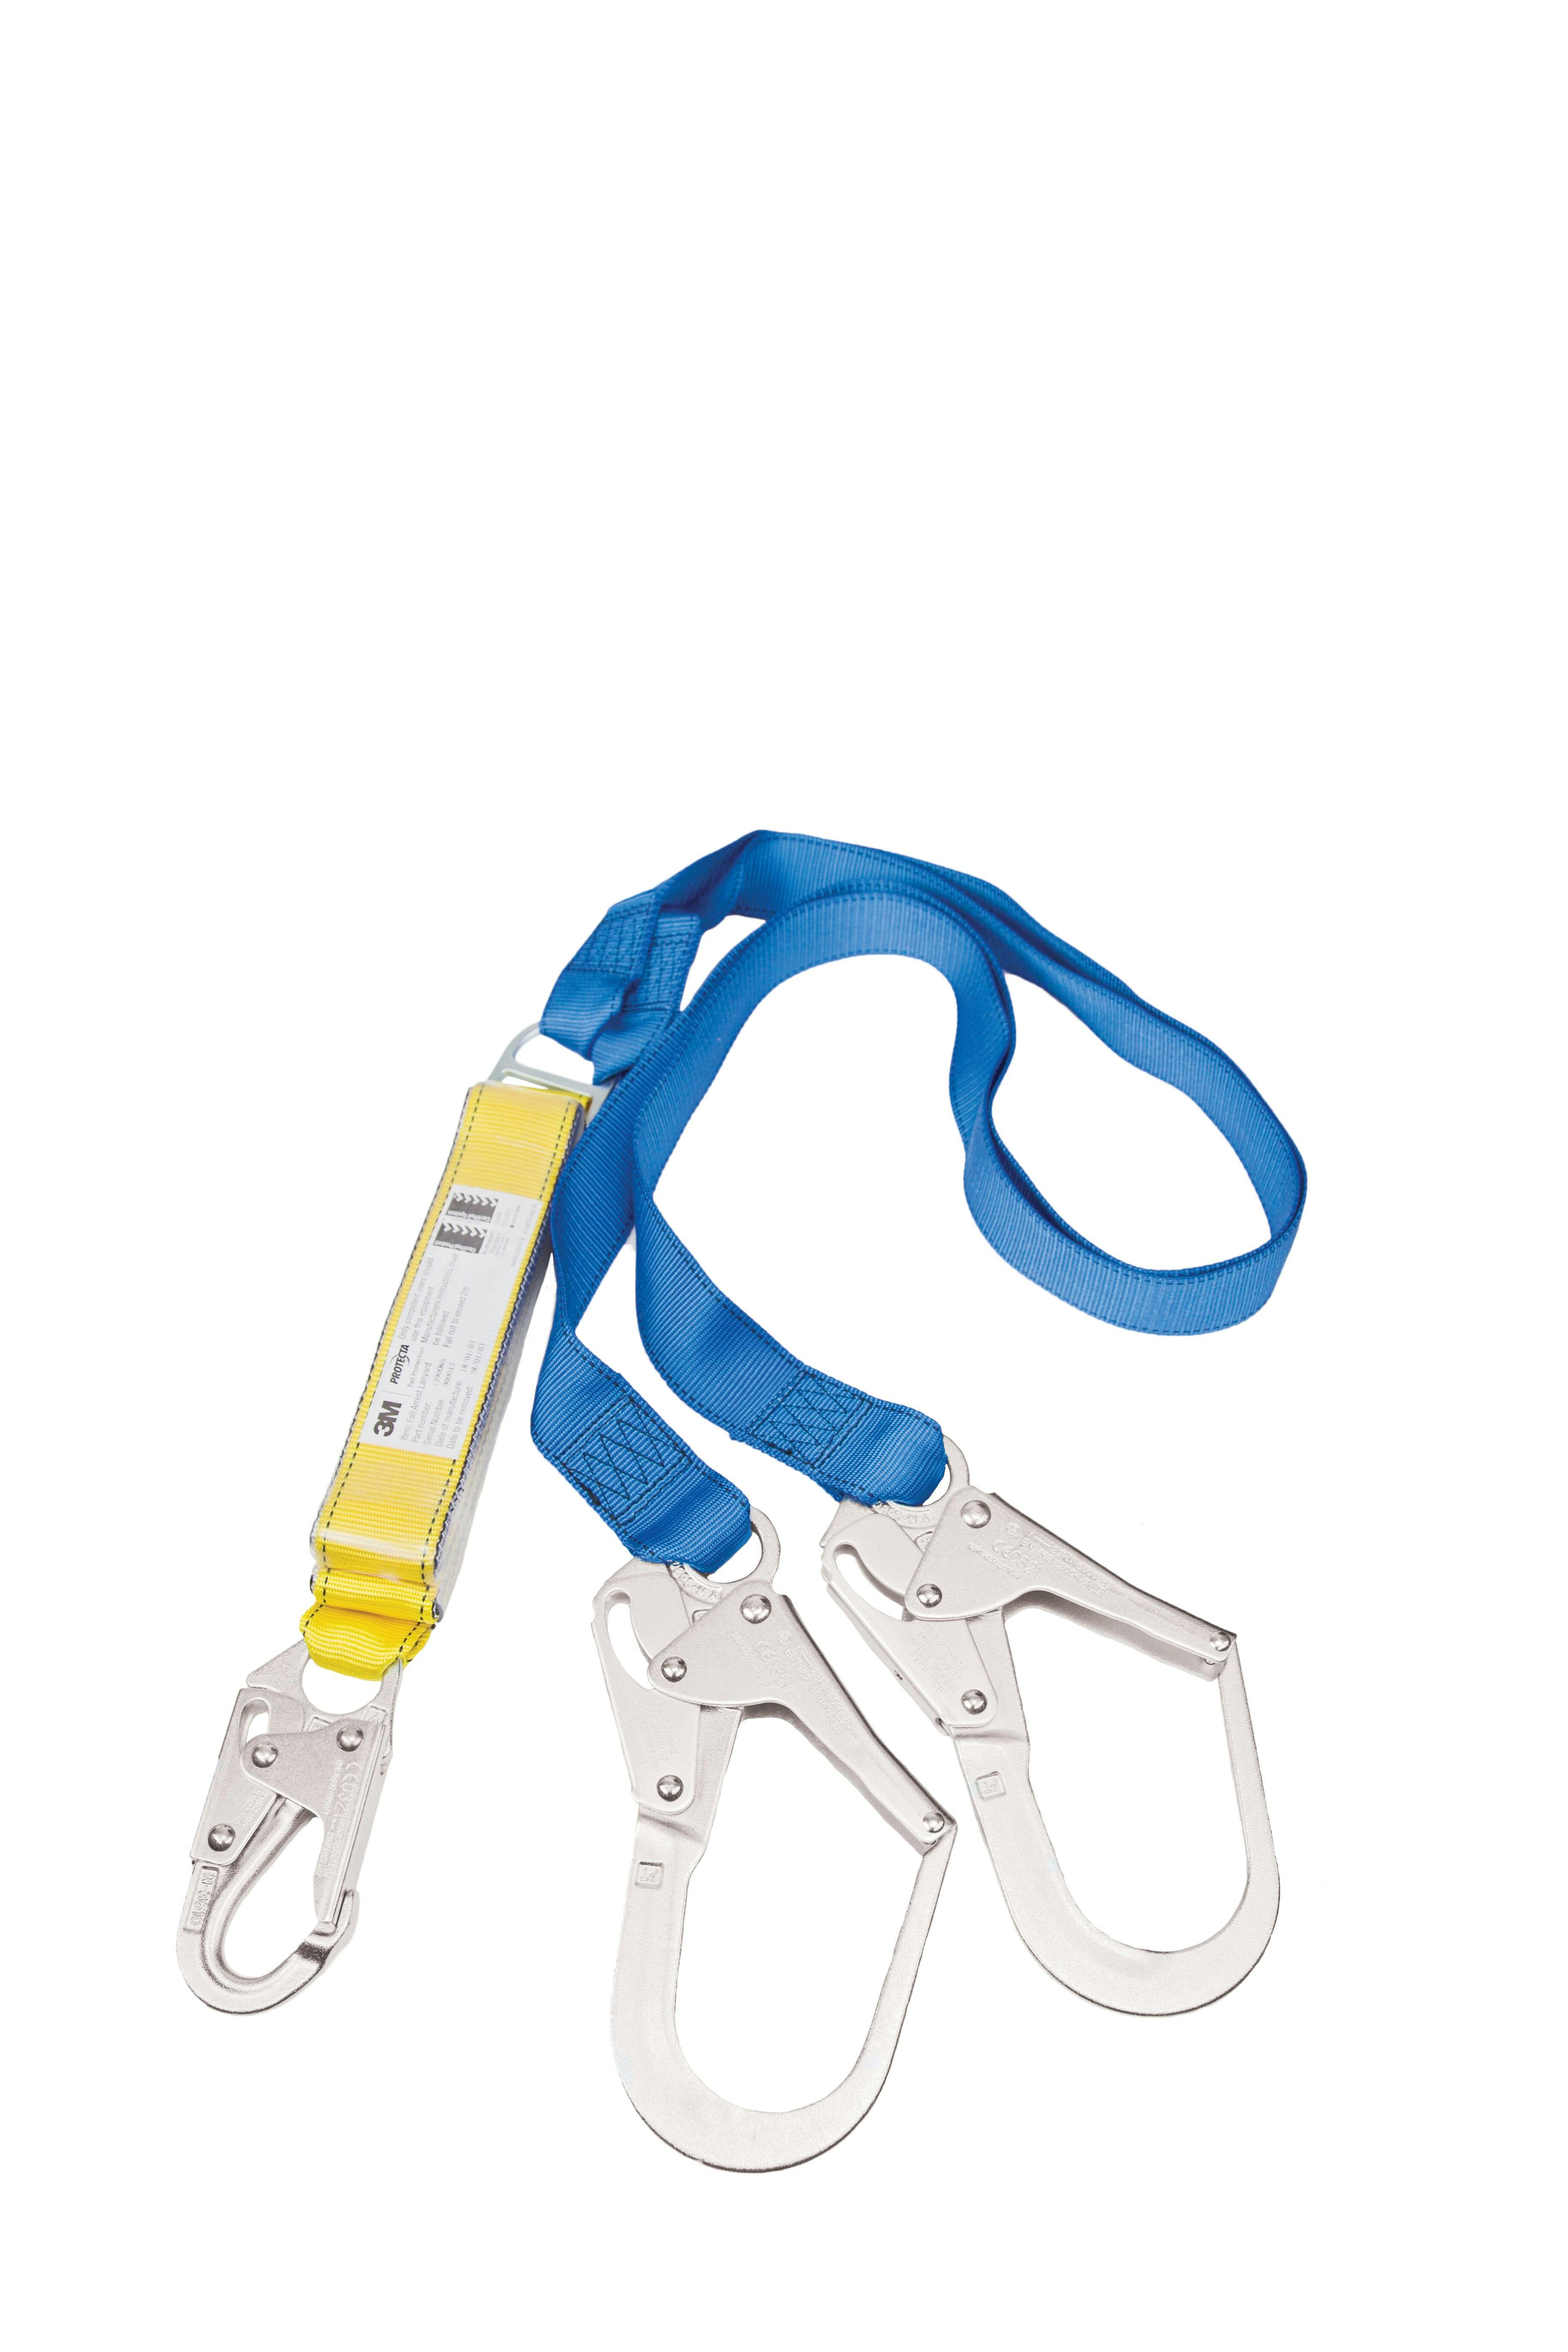 3M™ PROTECTA® FIRST Shock Absorbing Lanyard - Double Tail 1390065A, Blue and Yellow, 3.0 m, 1 EA/Case